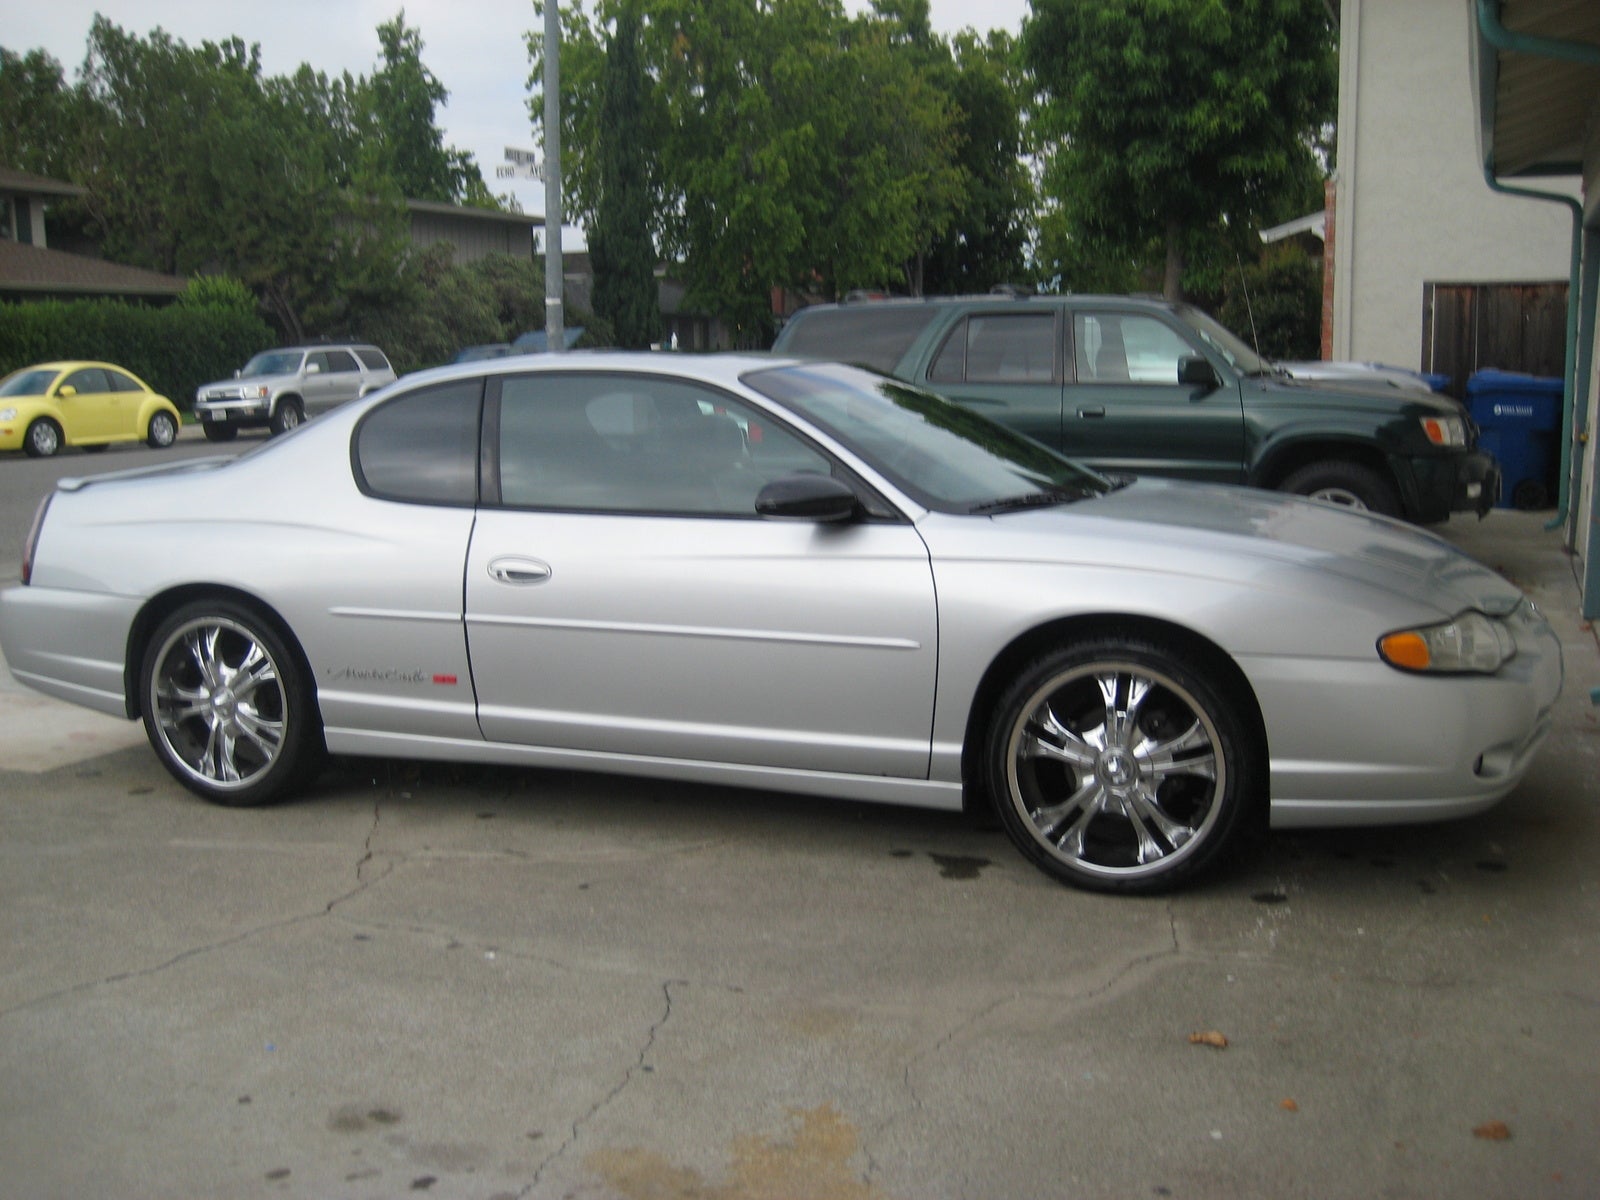 2001 Chevrolet Monte Carlo SS - Exterior Pictures - Picture of 2001 ...